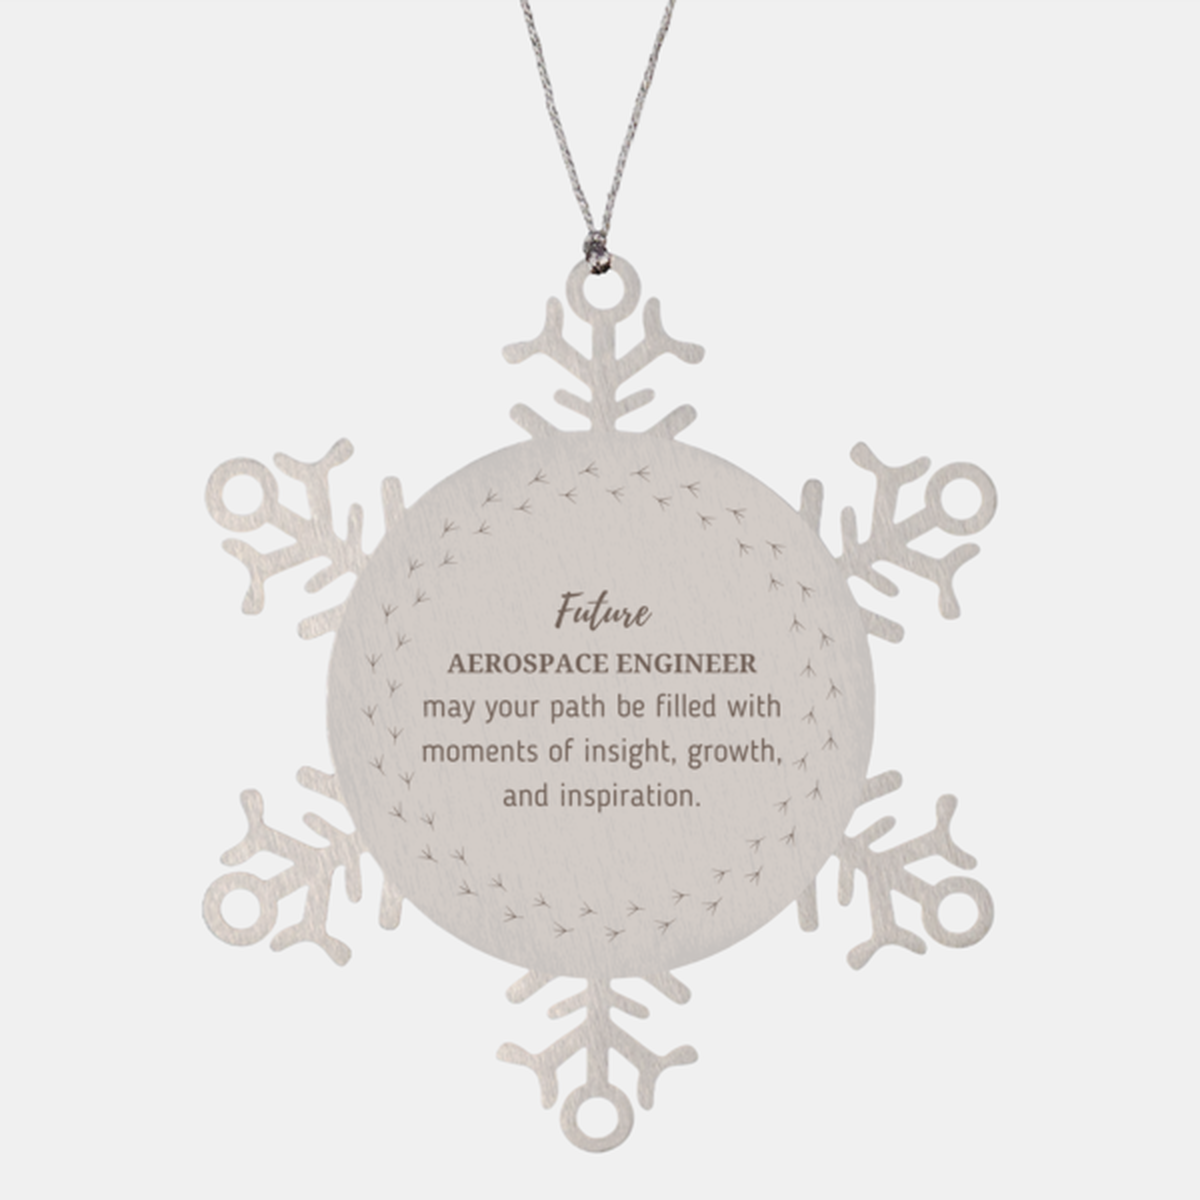 Future Aerospace Engineer Gifts, May your path be filled with moments of insight, Graduation Gifts for New Aerospace Engineer, Christmas Unique Snowflake Ornament For Men, Women, Friends